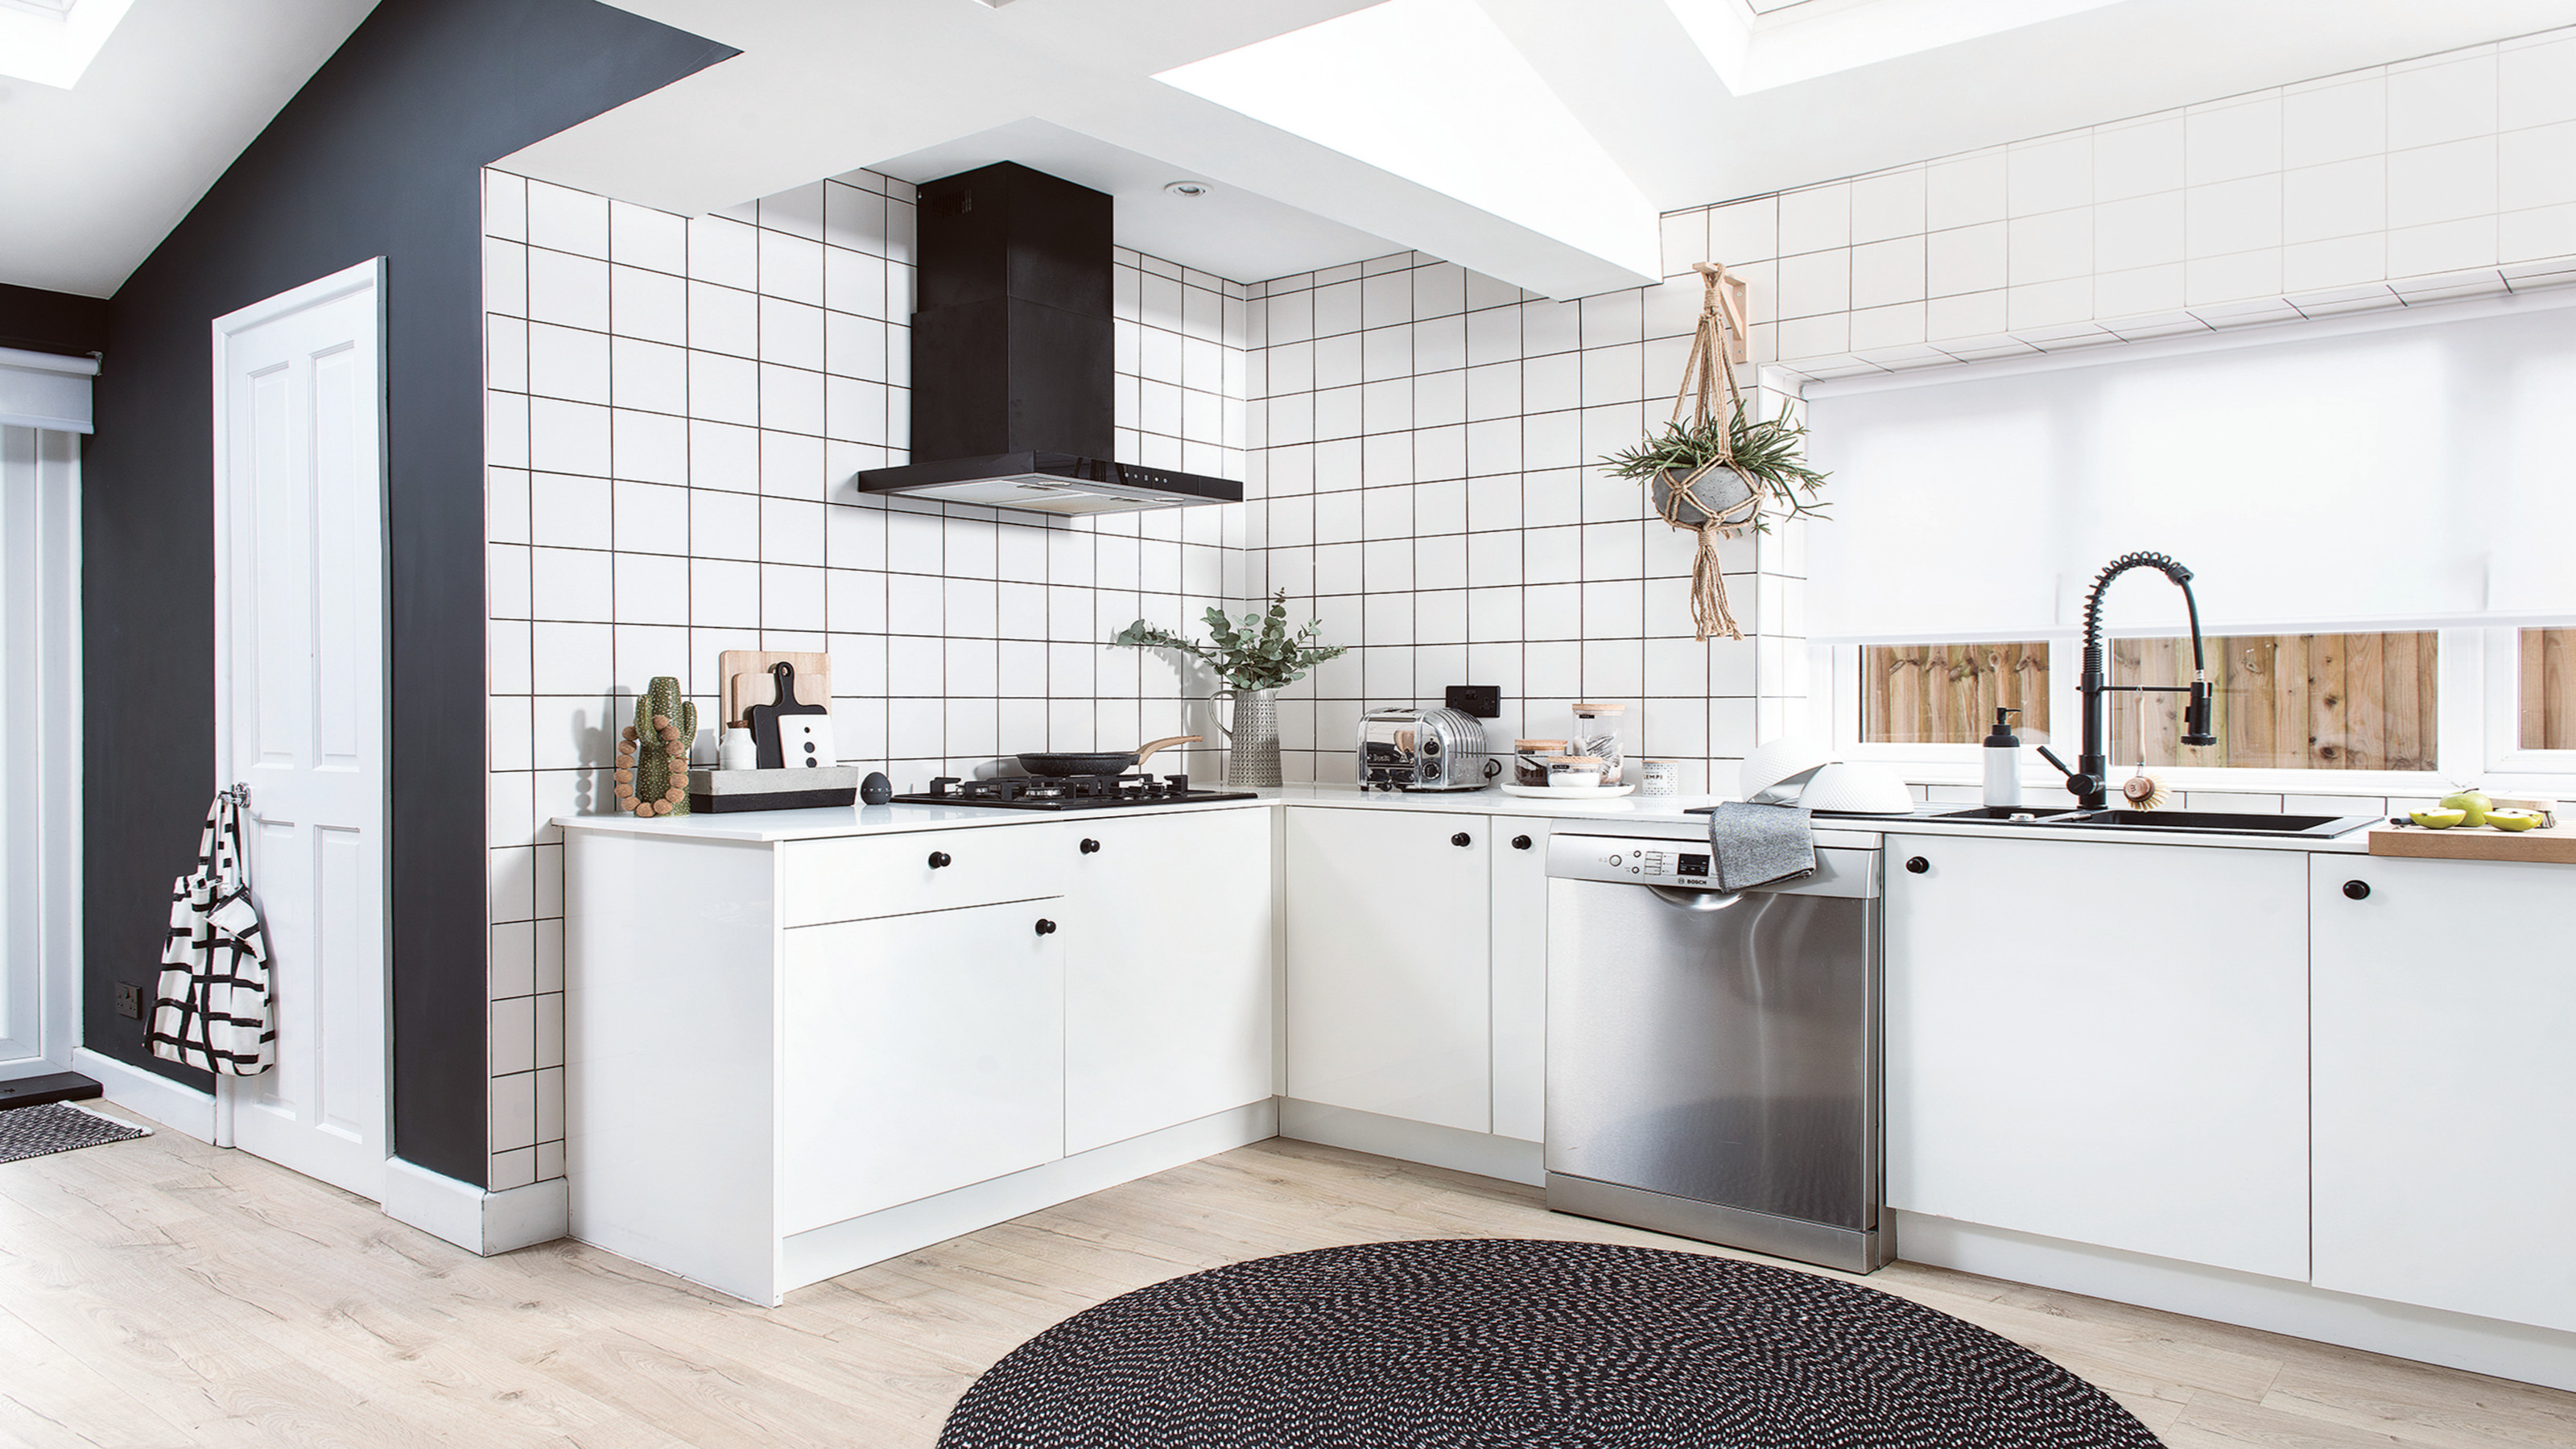 Kitchen decor mistakes to avoid that can put off buyers, according to  interior designer